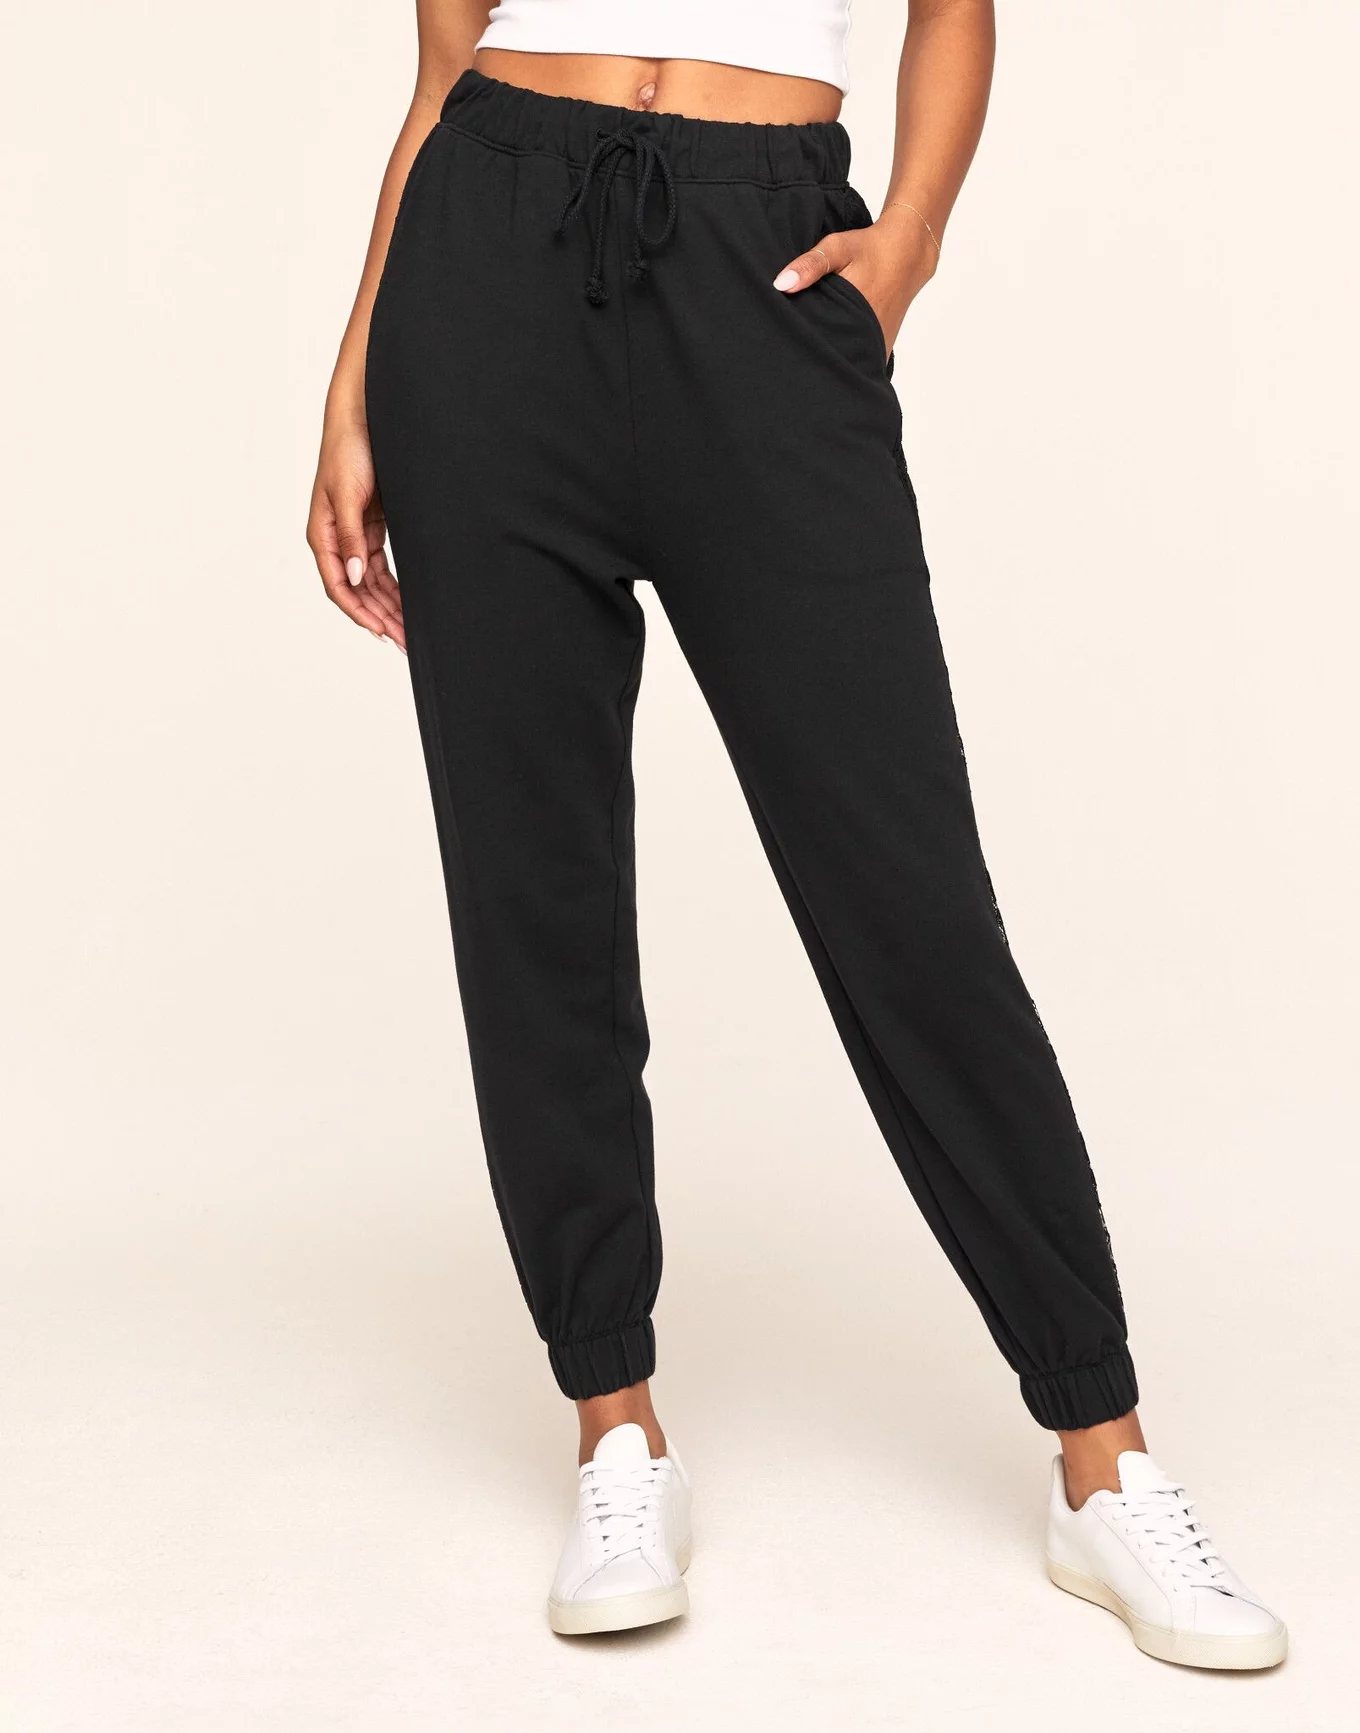 Black Oversized Joggers - Erica  Women pants casual, Pants for